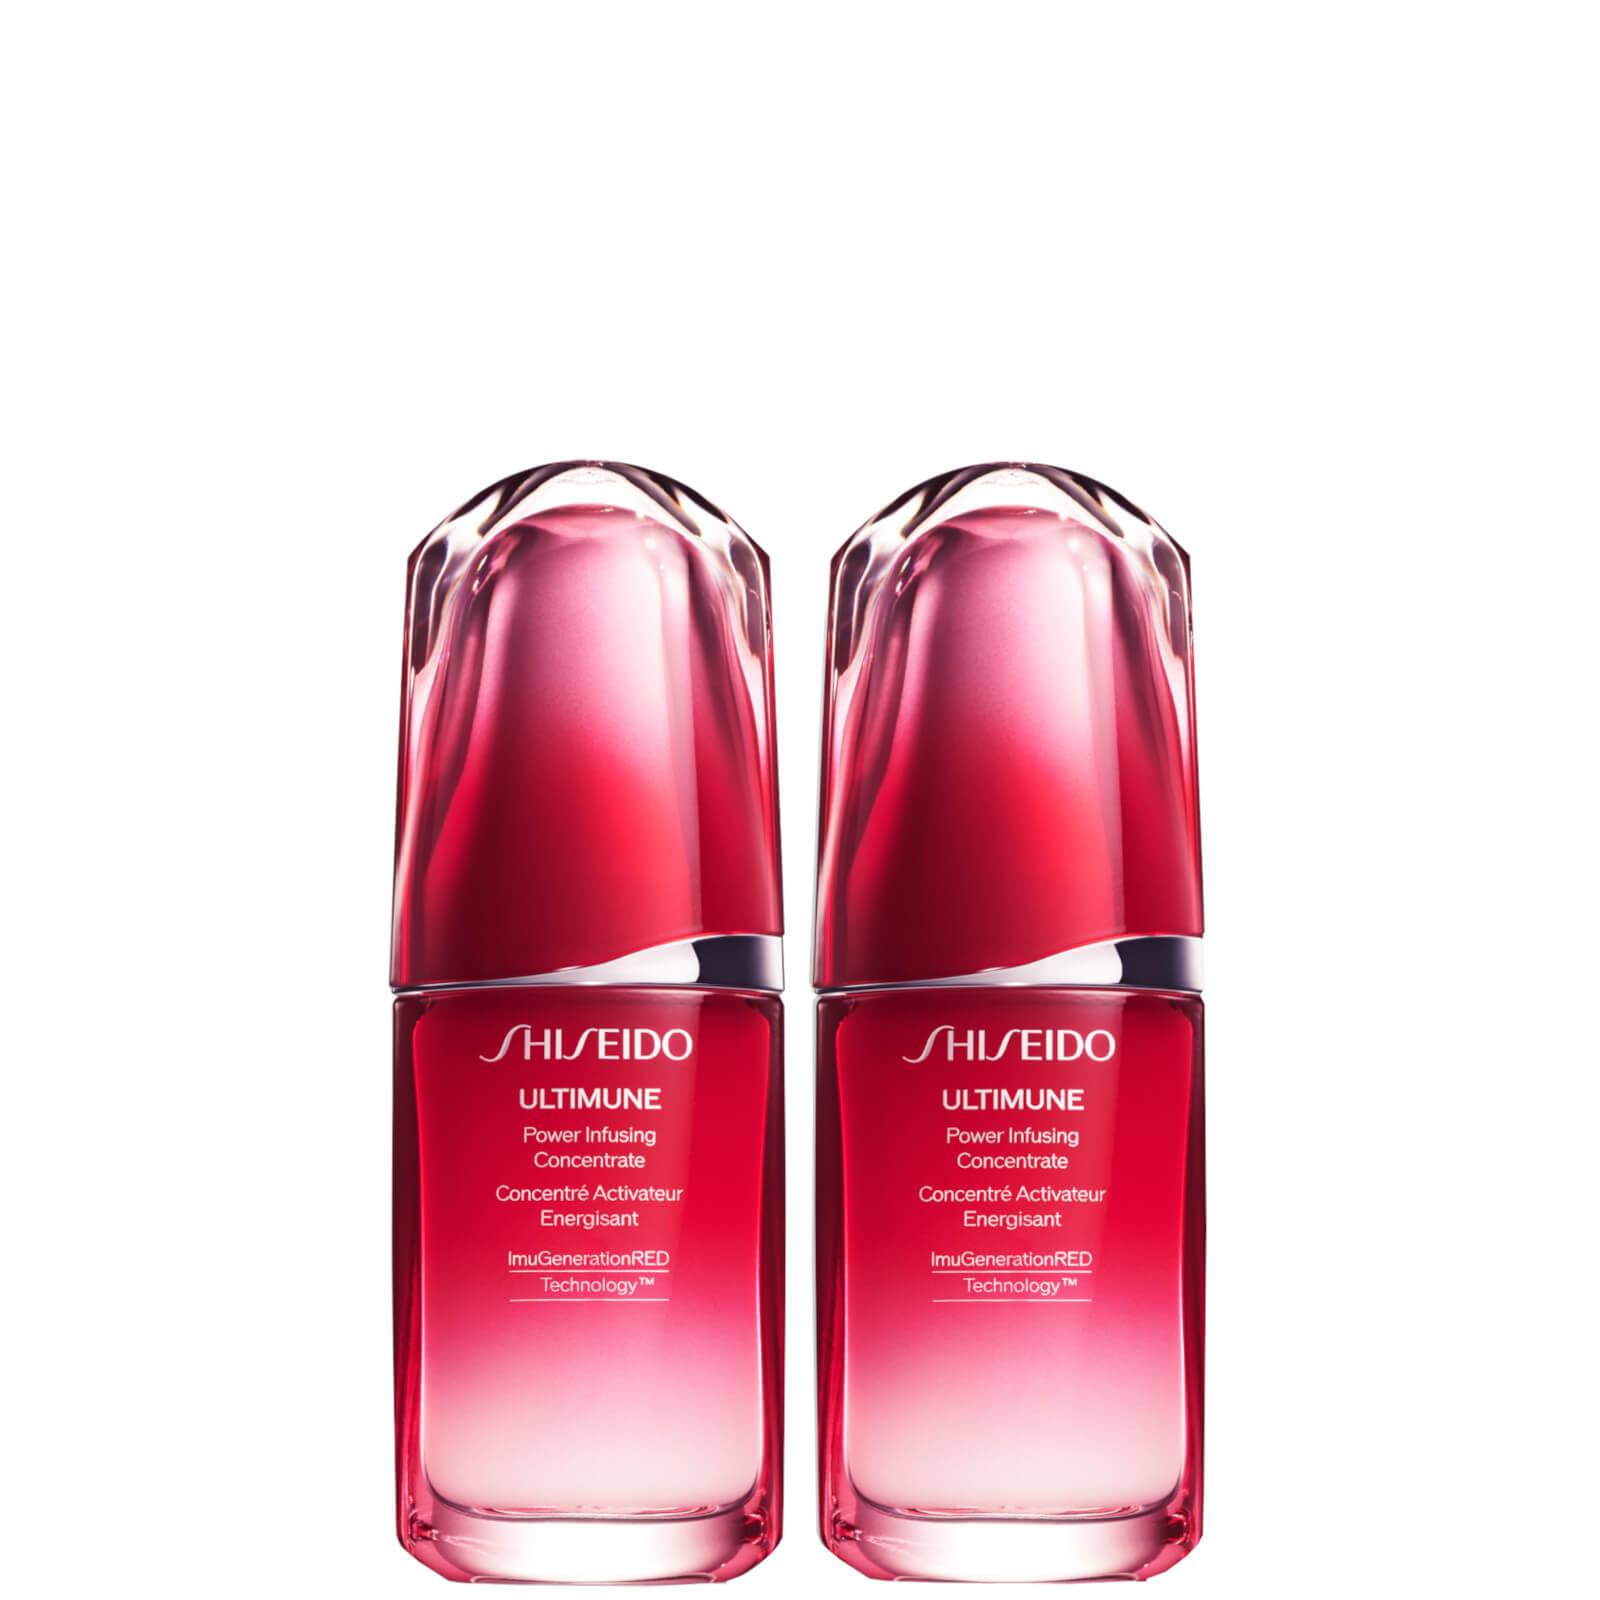 Shiseido ultimune power infusing concentrate. Shiseido Ultimune концентрат. Shiseido Power infusing Concentrate. Ultimune концентрат шисейдо Power infusing. Shiseido Ultimune Power infusing Serum.